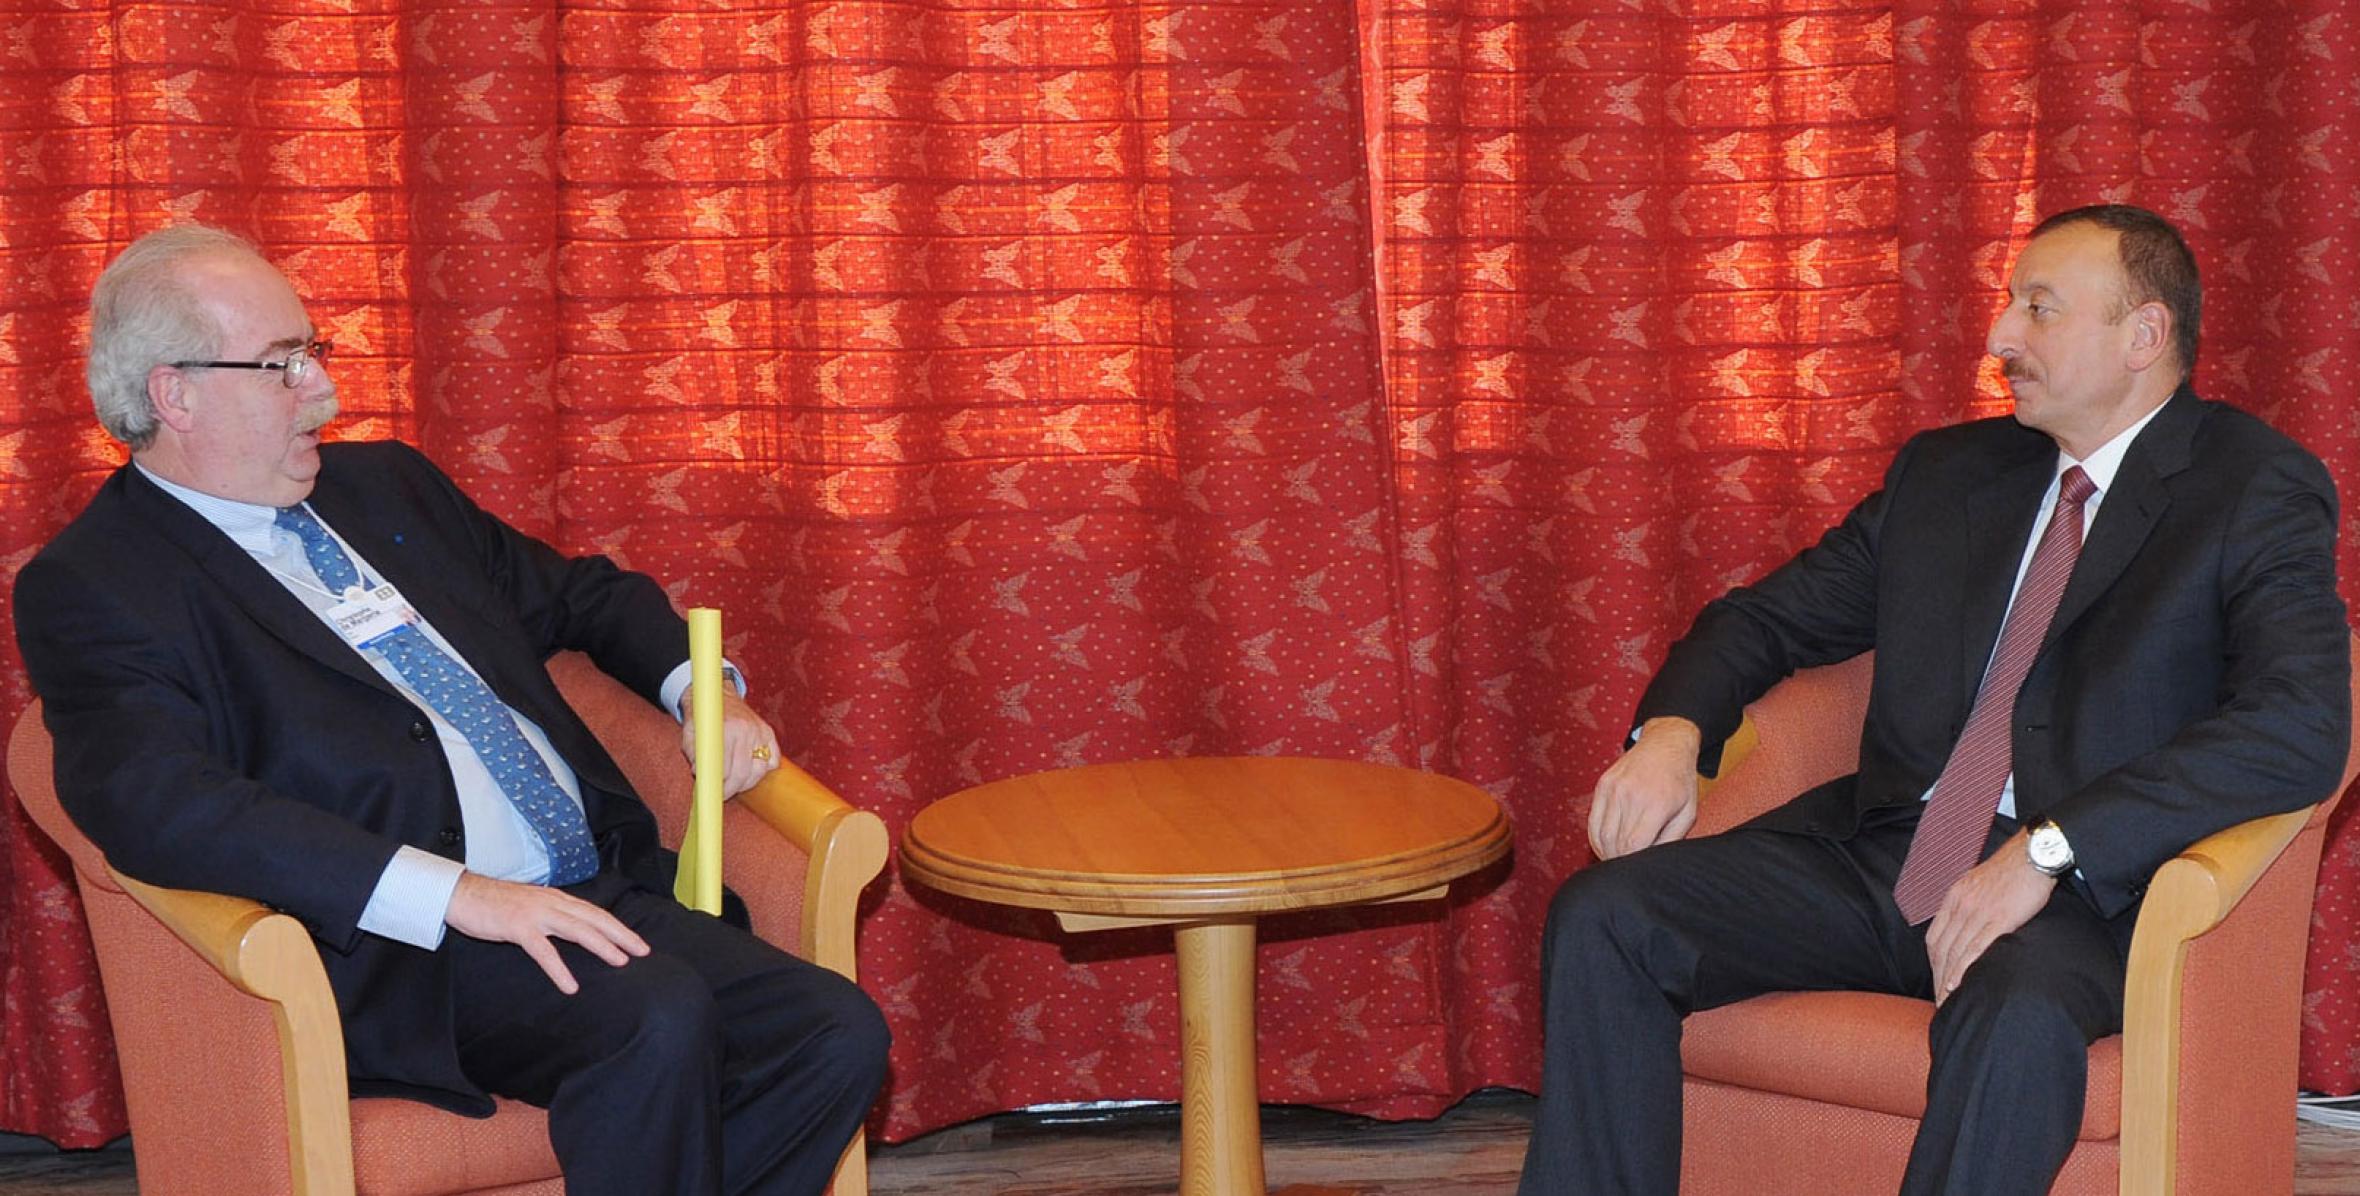 Ilham Aliyev met with CEO of TOTAL, Christophe de Margerie